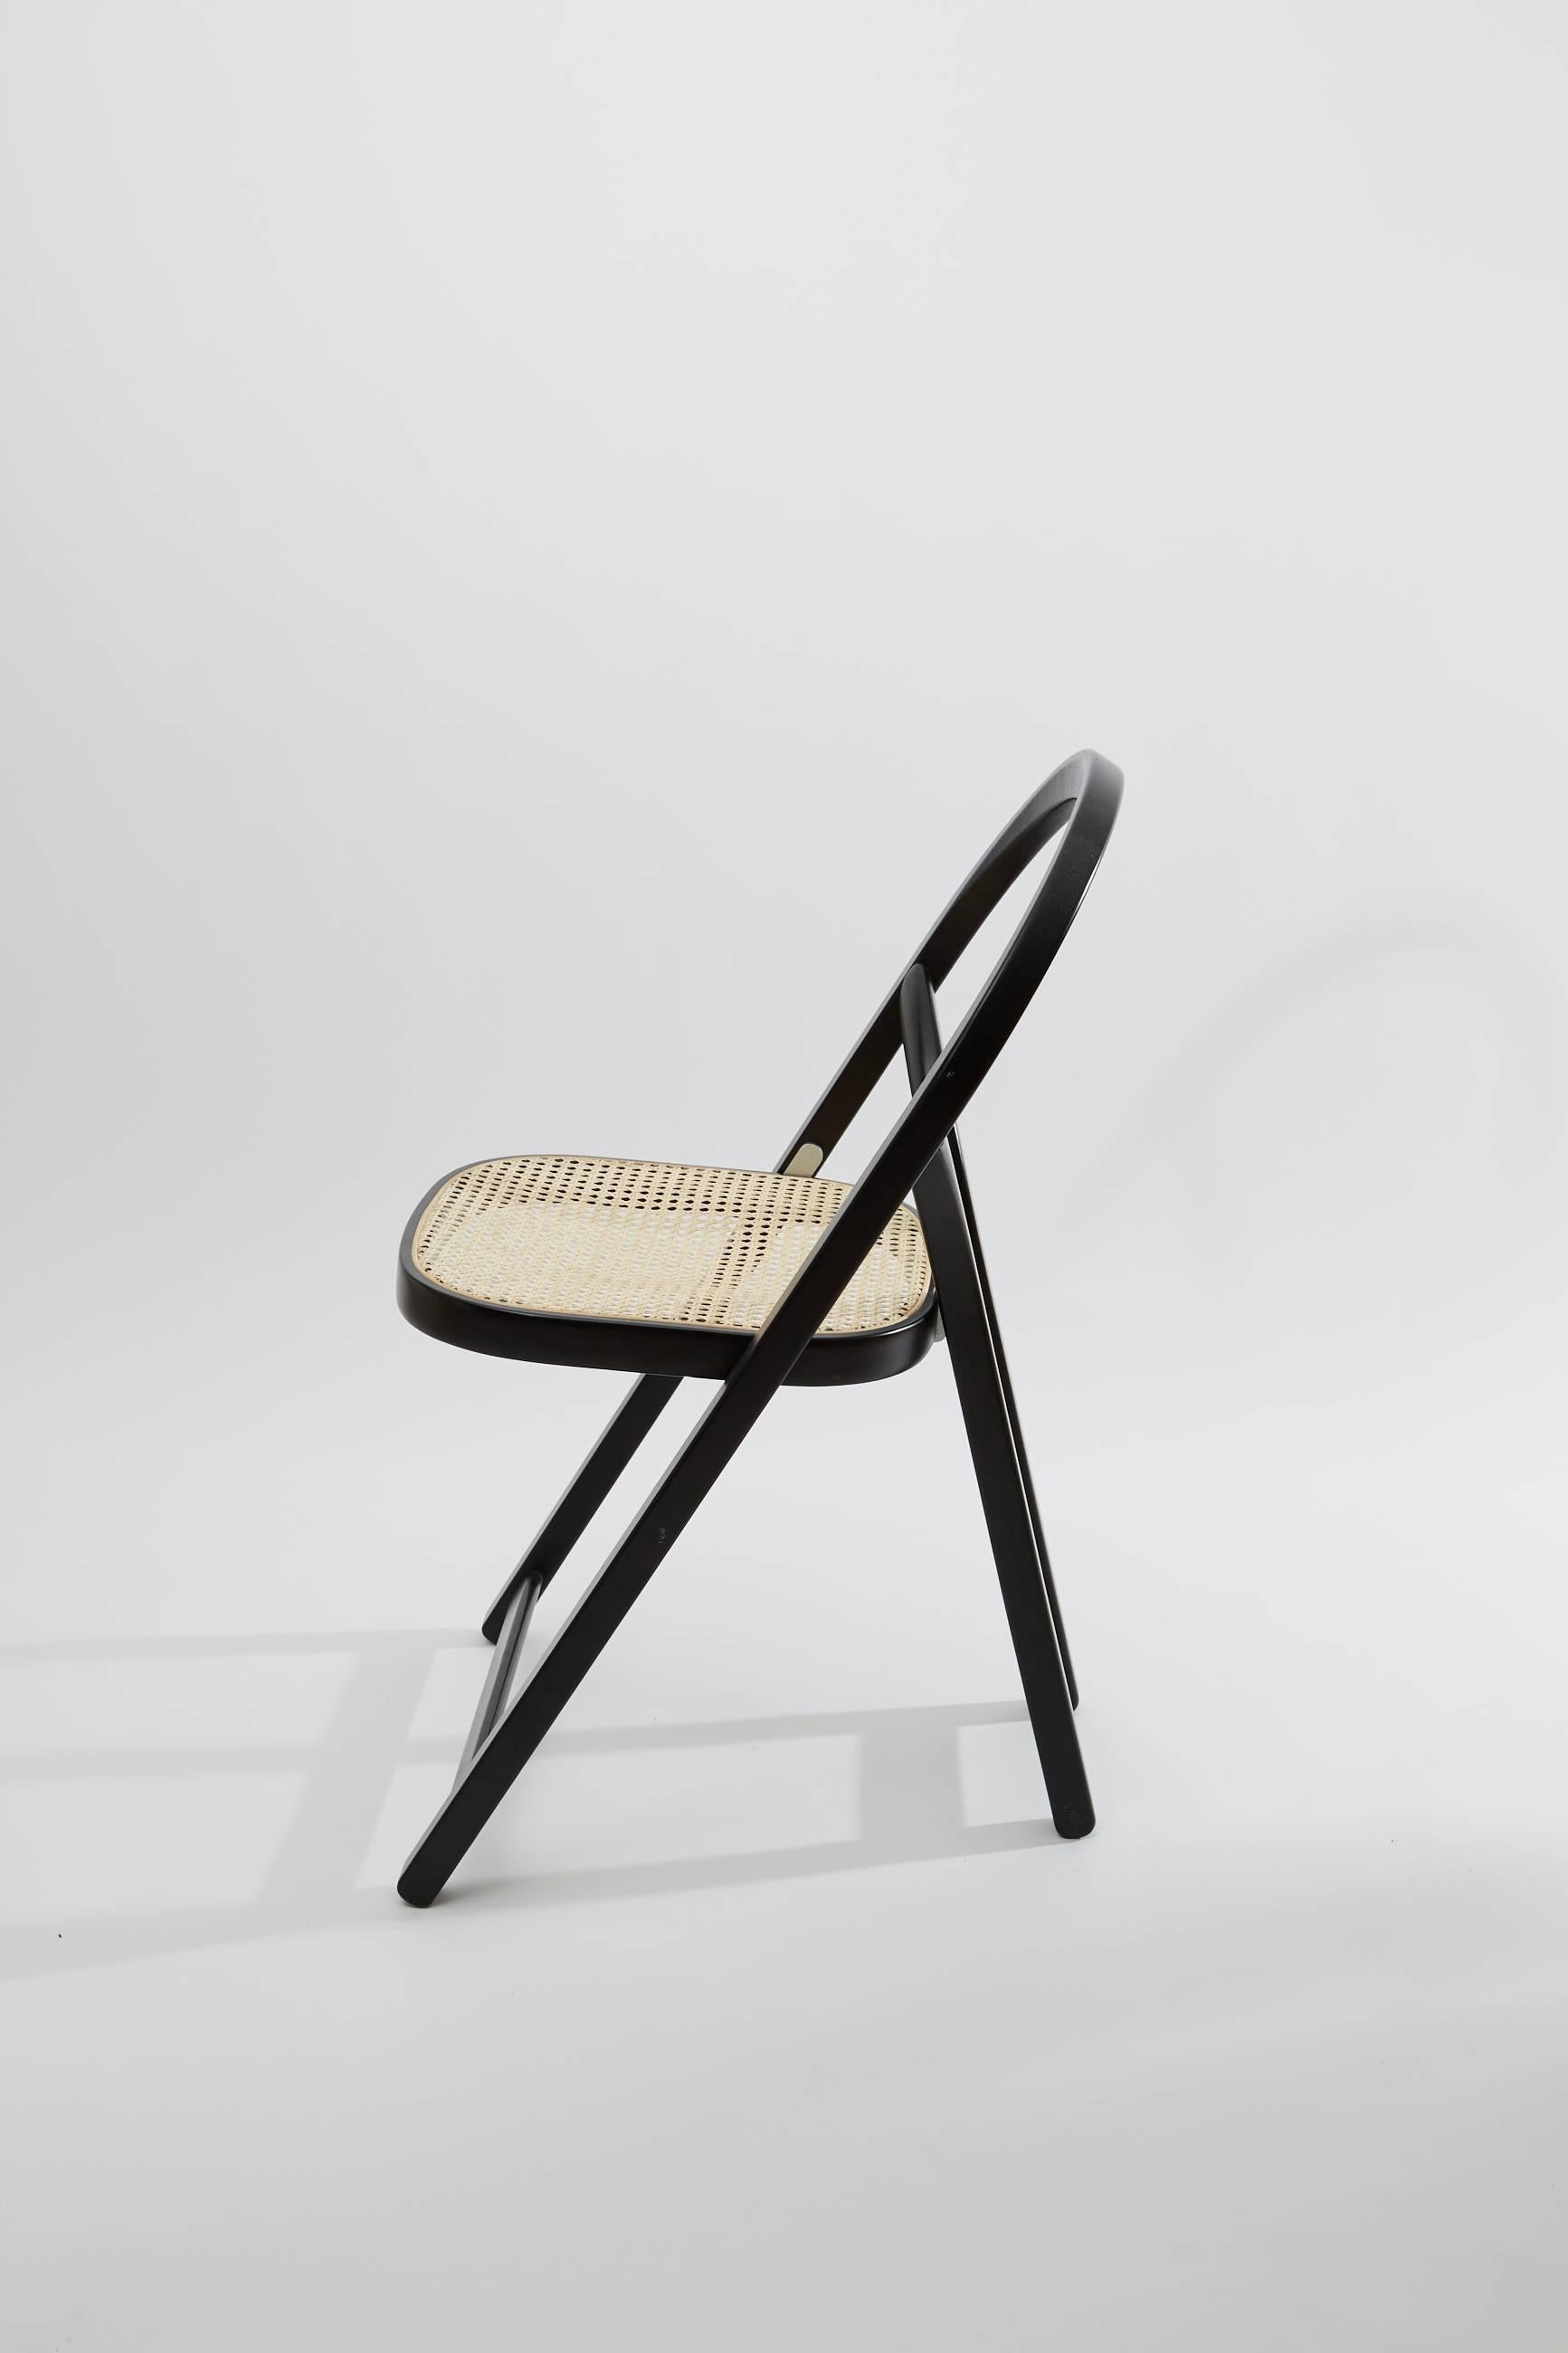 Arca chair design by Gigi Sabadin in 1974.
Crassevig edition.

Folding chair. 
Structure in black lacquered solid ash, steam bent. 
Seat in rattan.

Award: Selezione d’Onore del Compasso d’Oro 1979.